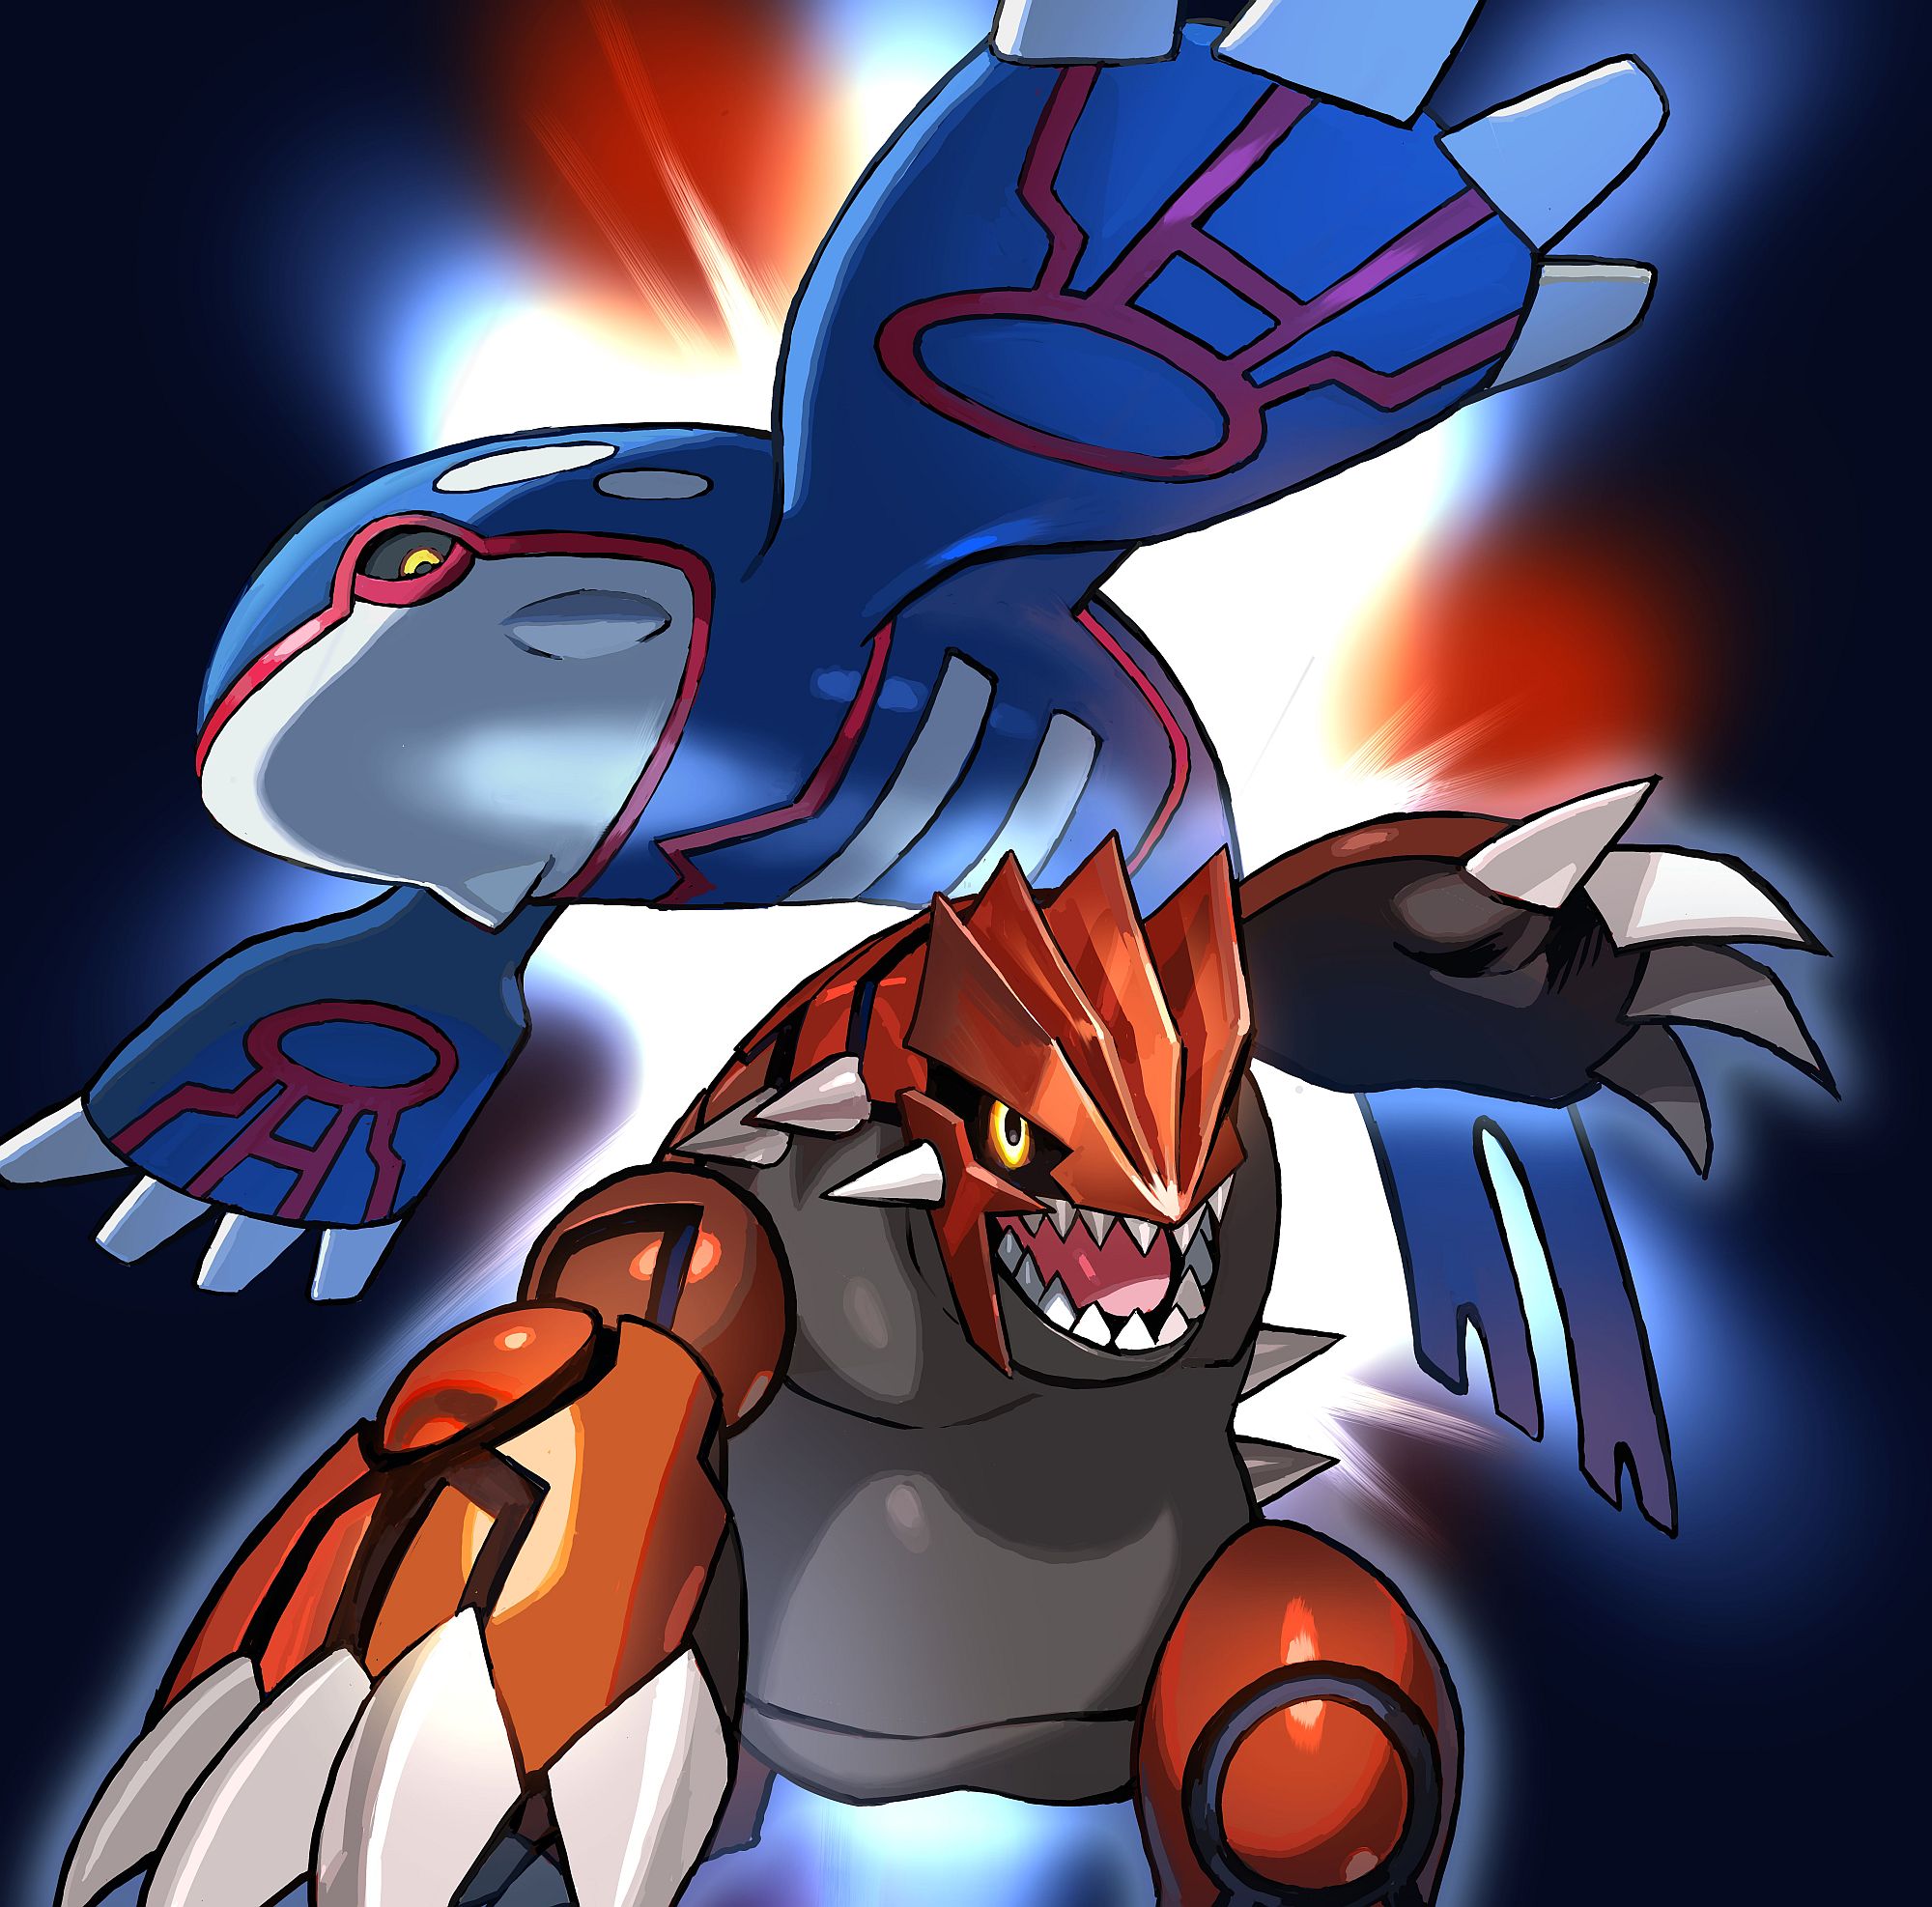 Image for Legendary Pokemon Kyogre and Groudon now available for Pokemon Sun and Moon